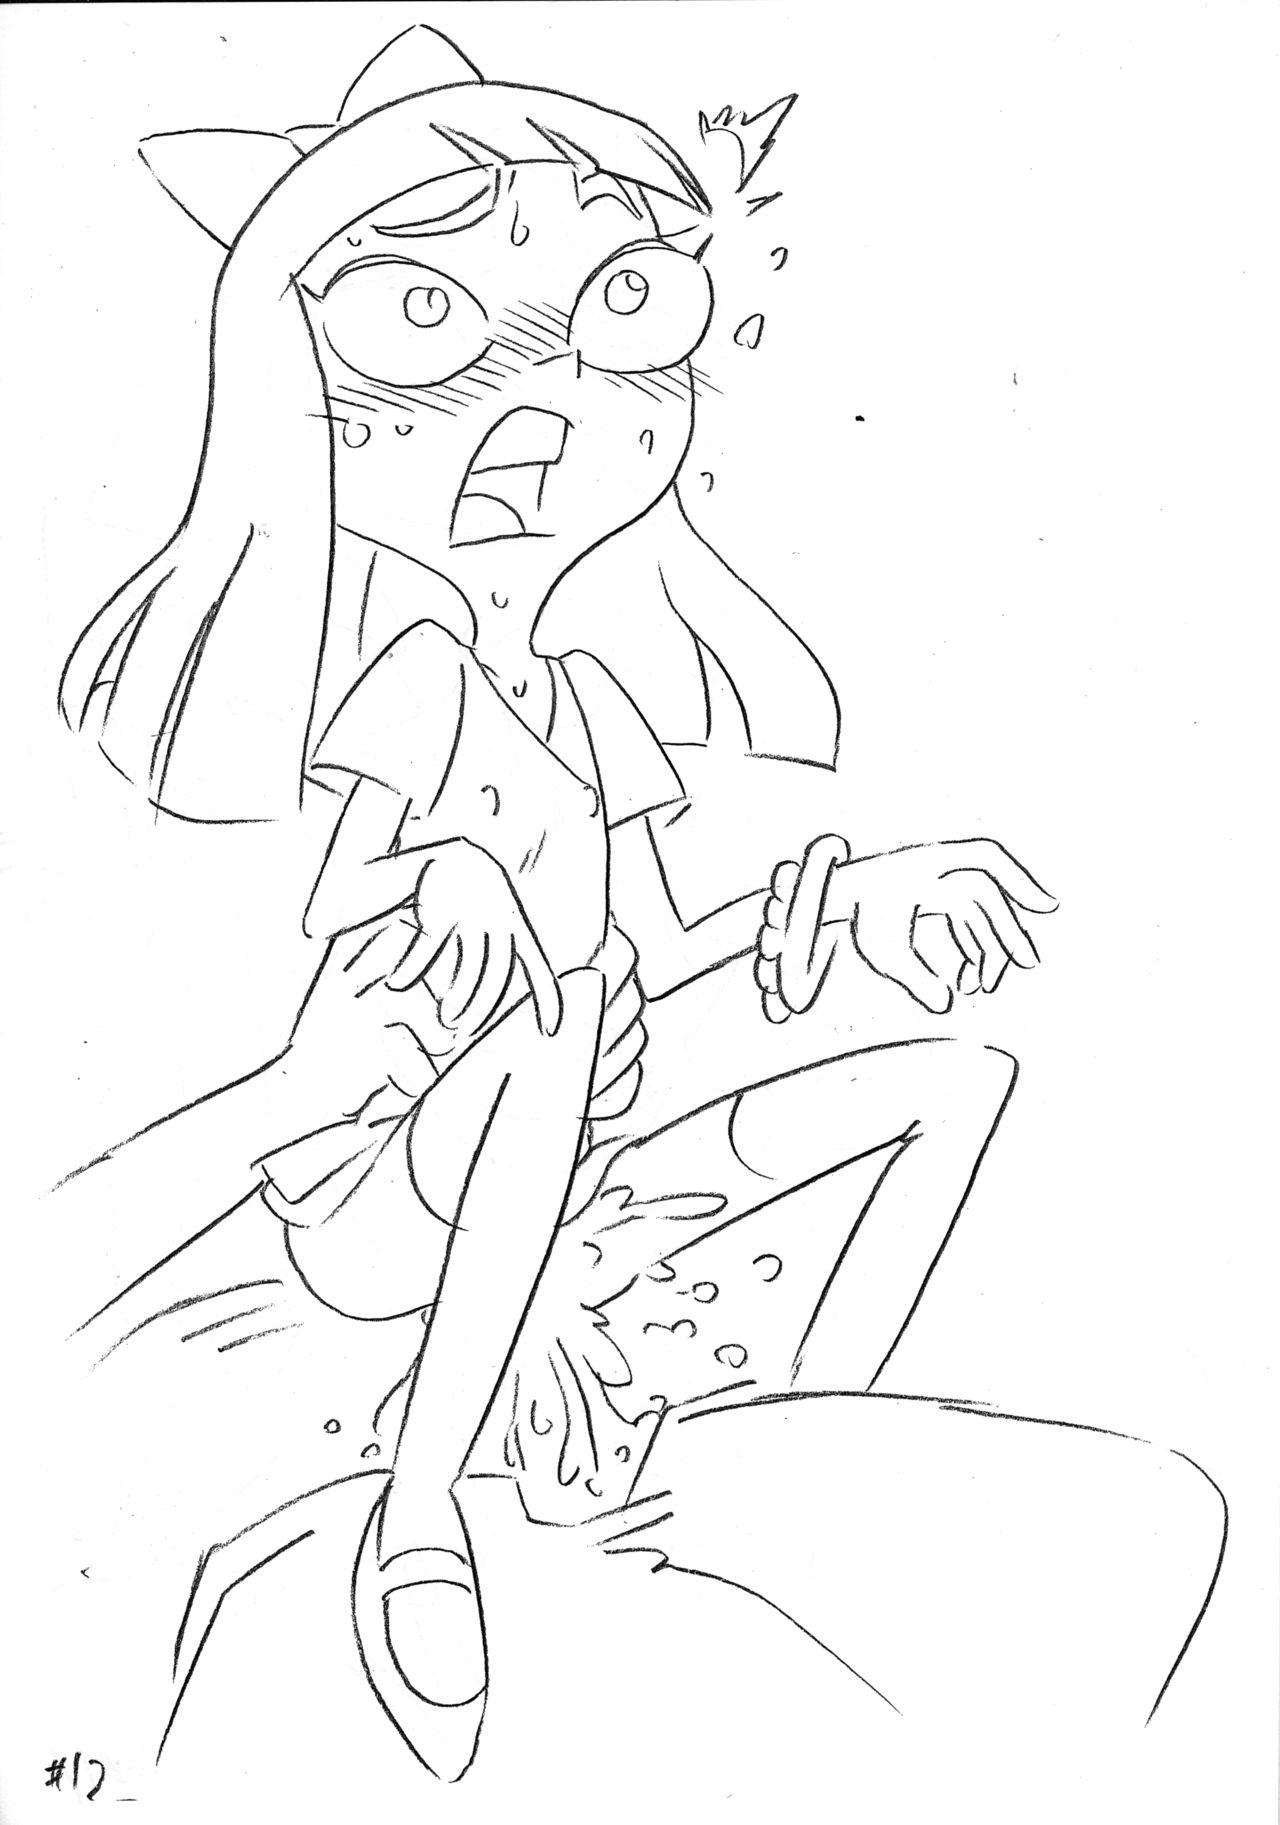 Sapphic Erotica Psychosomatic Counterfeit Ex: Stacy in Early Age - Phineas and ferb Euro - Page 11